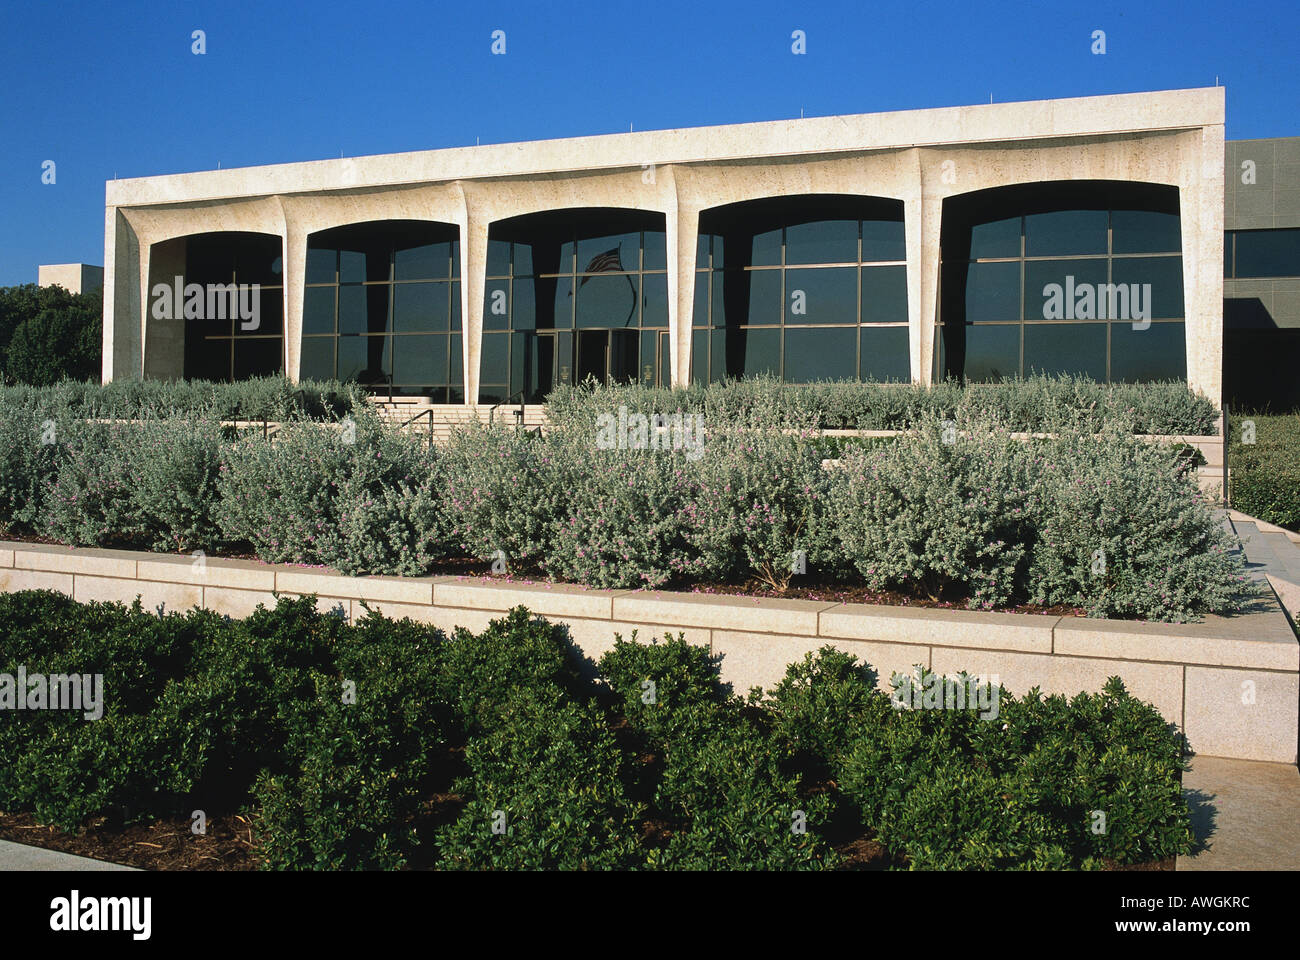 USA, Texas, Fort Worth, Amon Carter Museum, façade, housing American Art of the Wild West, Stock Photo